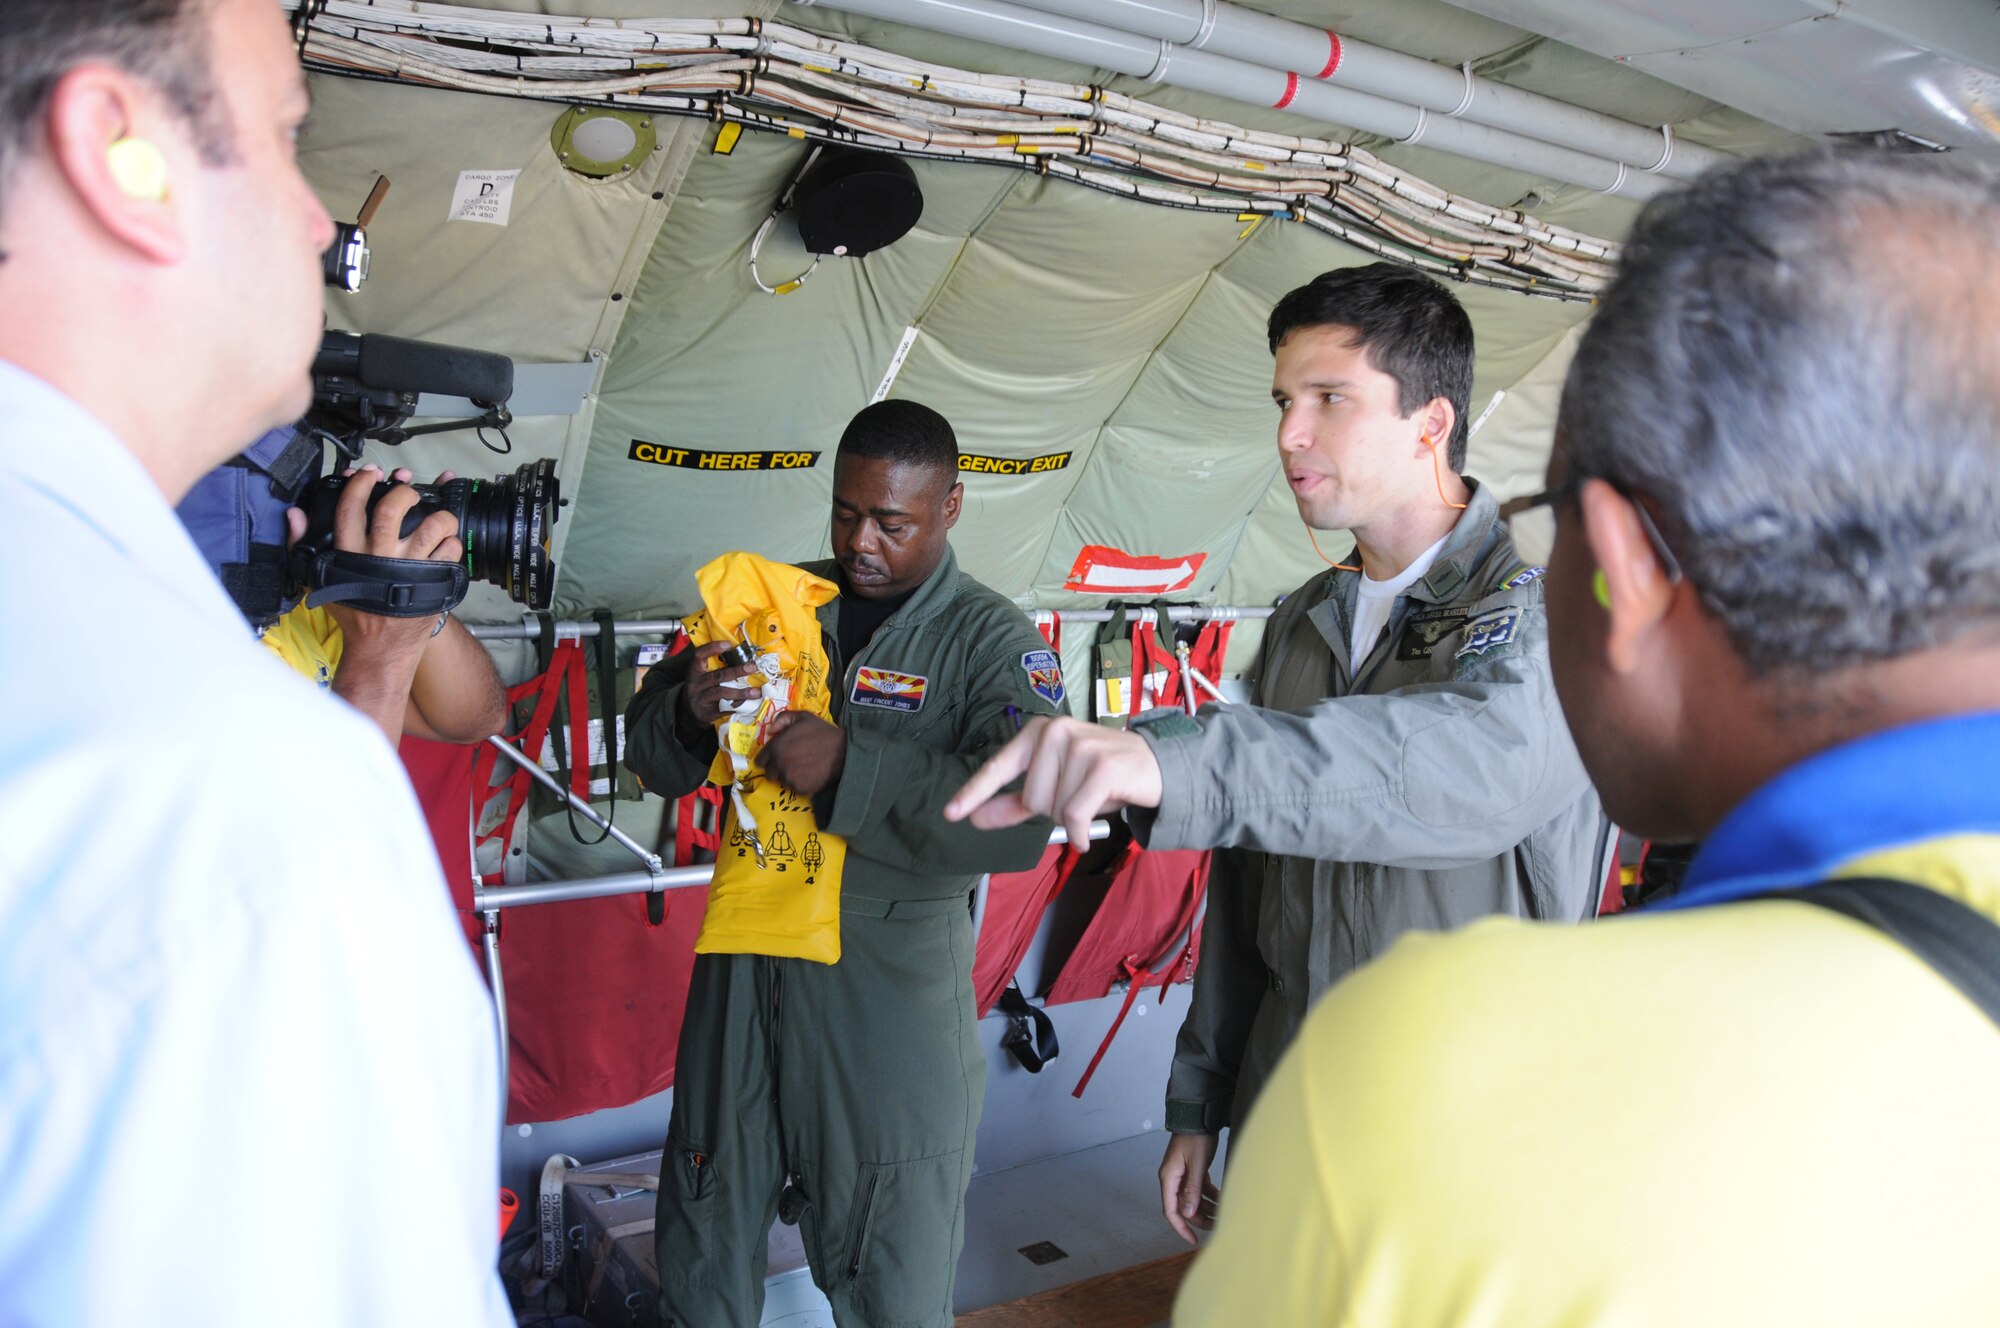 RECIFE, Brazil ? Master Sgt Vince Jones,  a boom operator for the 161st Air Refueling Wing, Phoenix Ariz., and LT Ortiz, a pilot for the Brazilian Air Force, give a safety briefing to a local media crew before a refueling mission on November 9, 2010. The 161st ARW is participating in CRUZEX V, or Cruzeiro Do Sul (Southern Cross).  CRUZEX  is a multi-national combined exercise involving the Air Forces of Argentina, Brazil, Chile, France and Uruguay, and observers from numerous other countries with more than 82 aircraft and almost 3,000 Airmen involved. U.S. Air Force Photo by Master Sgt. Kelly M. Deitloff